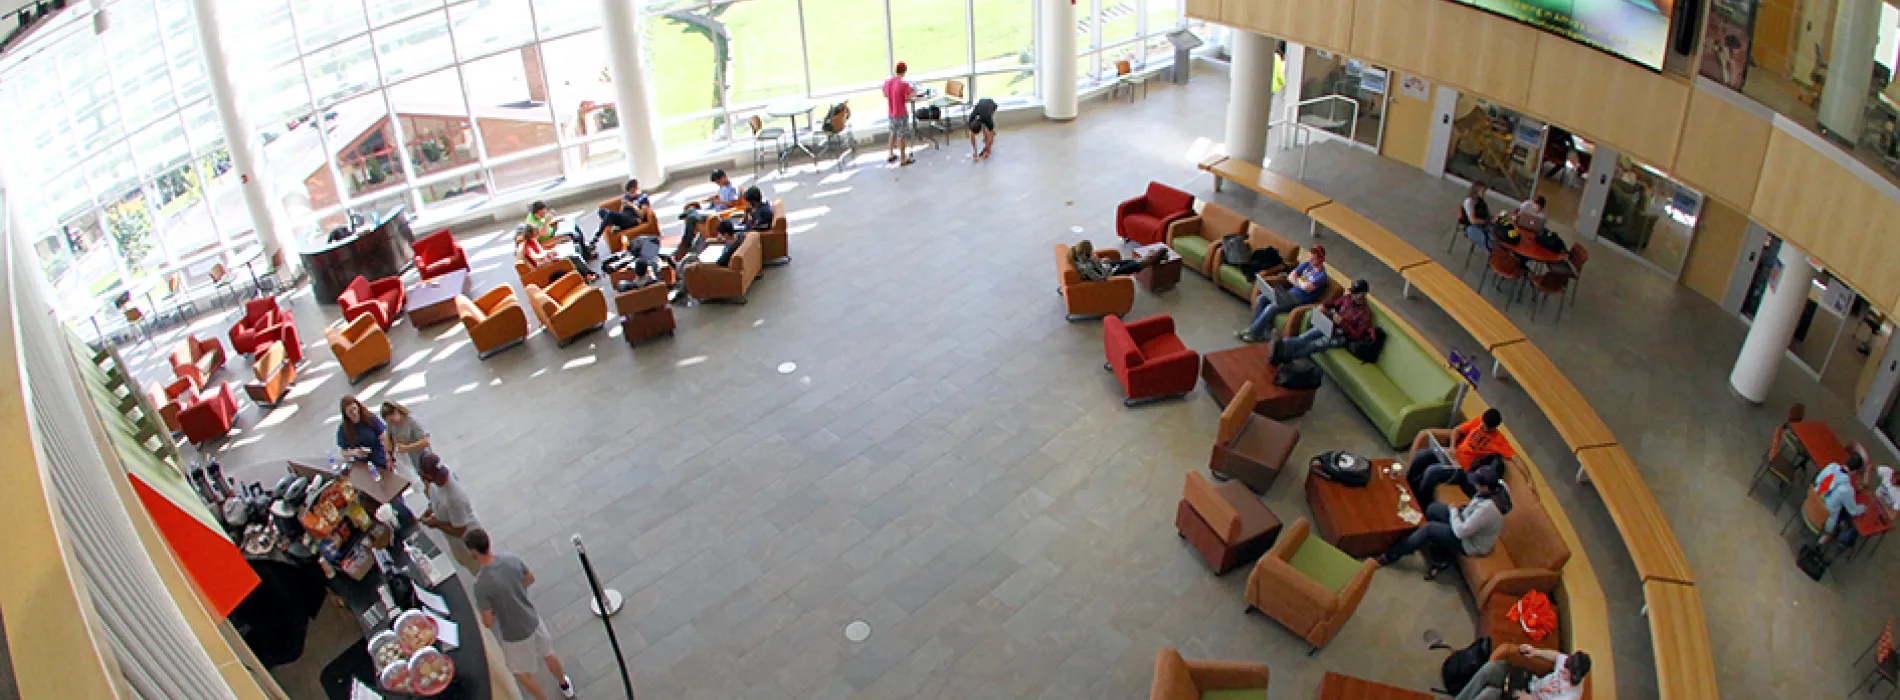 view looking down in Student Leadership Center, students in chairs